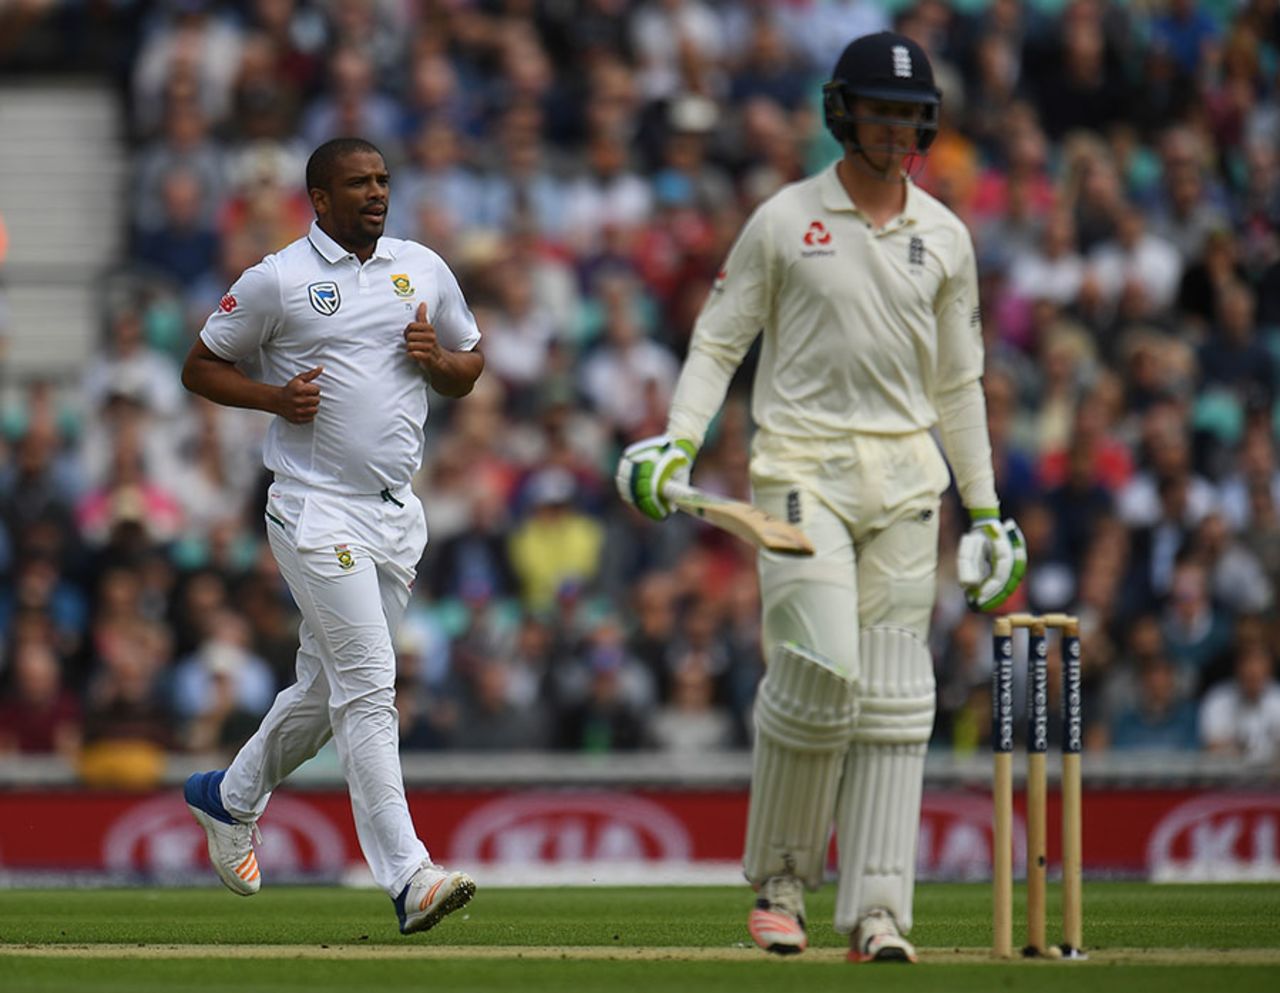 Vernon Philander removed Keaton Jennings for a duck, England v South Africa, 3rd Investec Test, The Oval, July 27, 2017